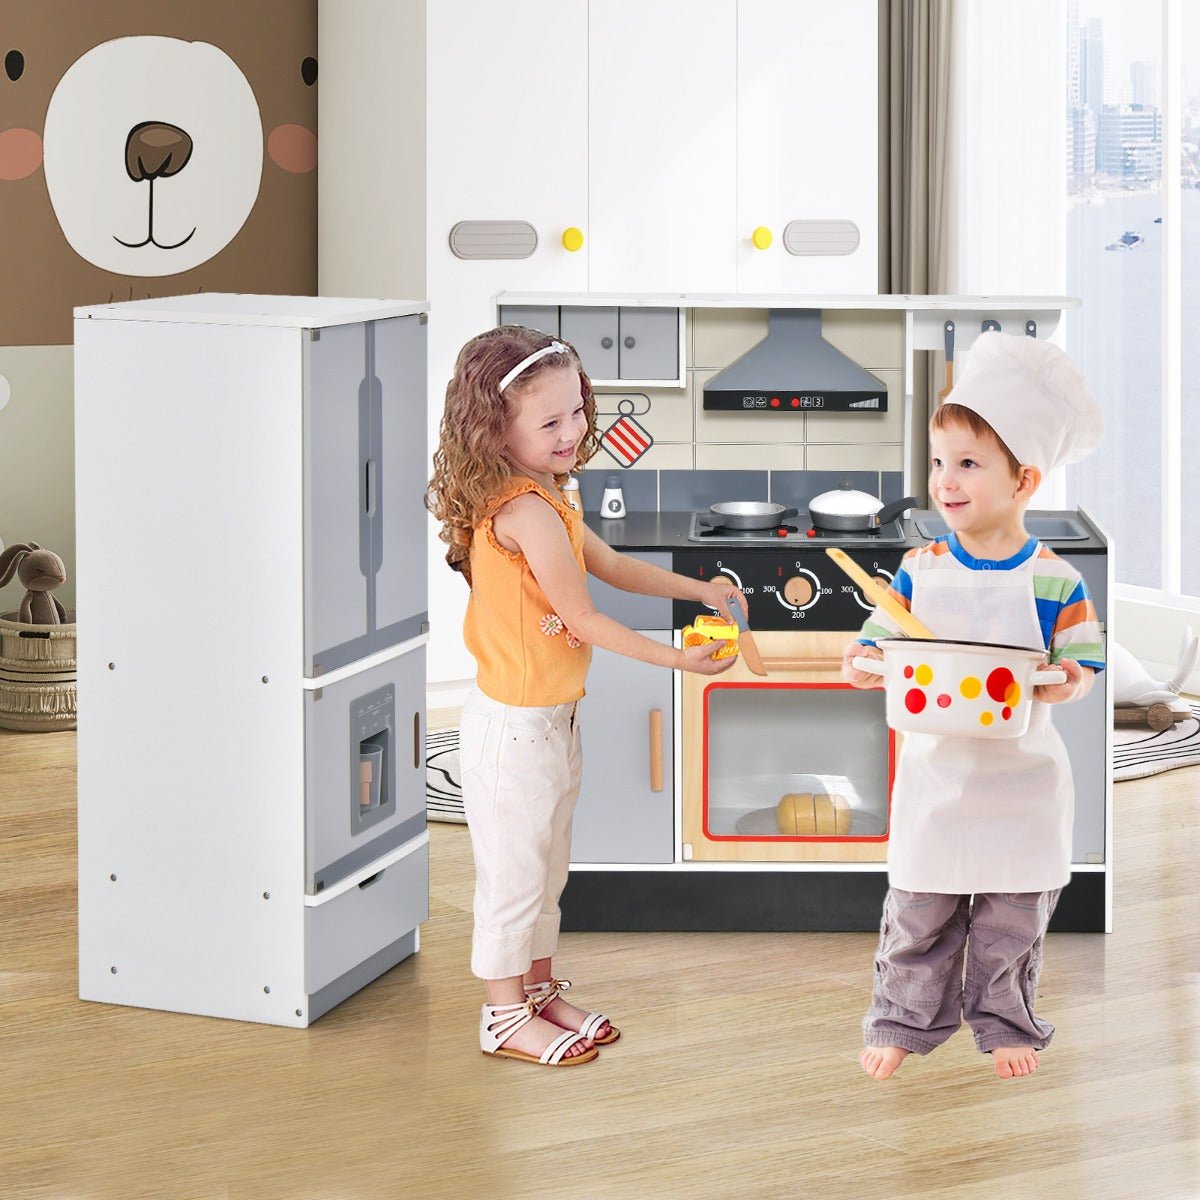 Play Kitchen Set With Refrigerator Open